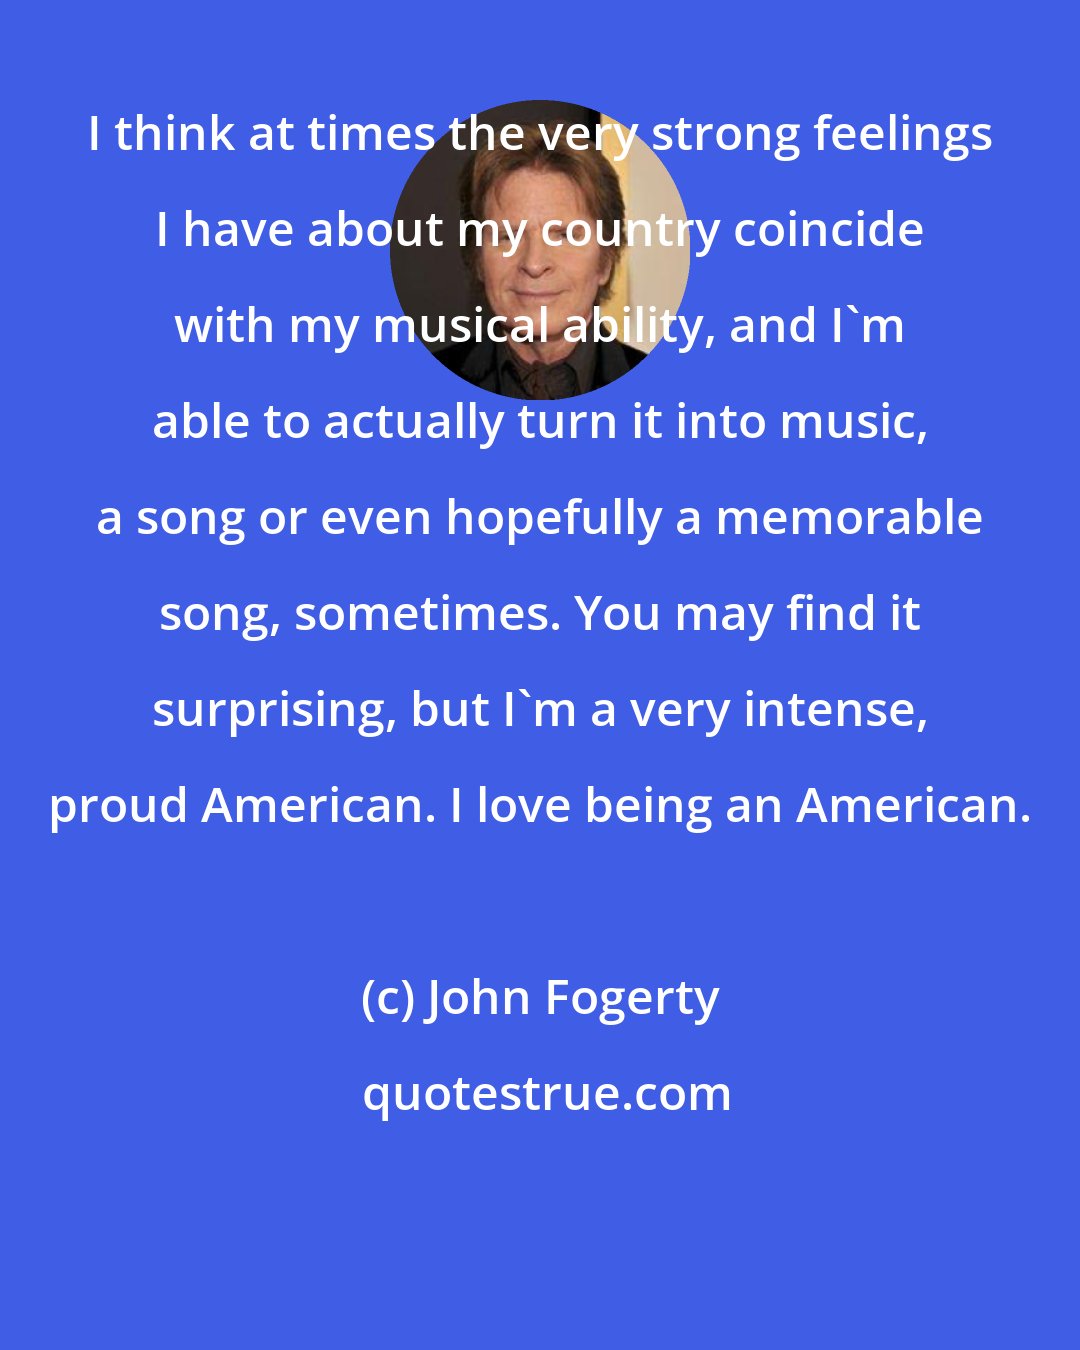 John Fogerty: I think at times the very strong feelings I have about my country coincide with my musical ability, and I'm able to actually turn it into music, a song or even hopefully a memorable song, sometimes. You may find it surprising, but I'm a very intense, proud American. I love being an American.